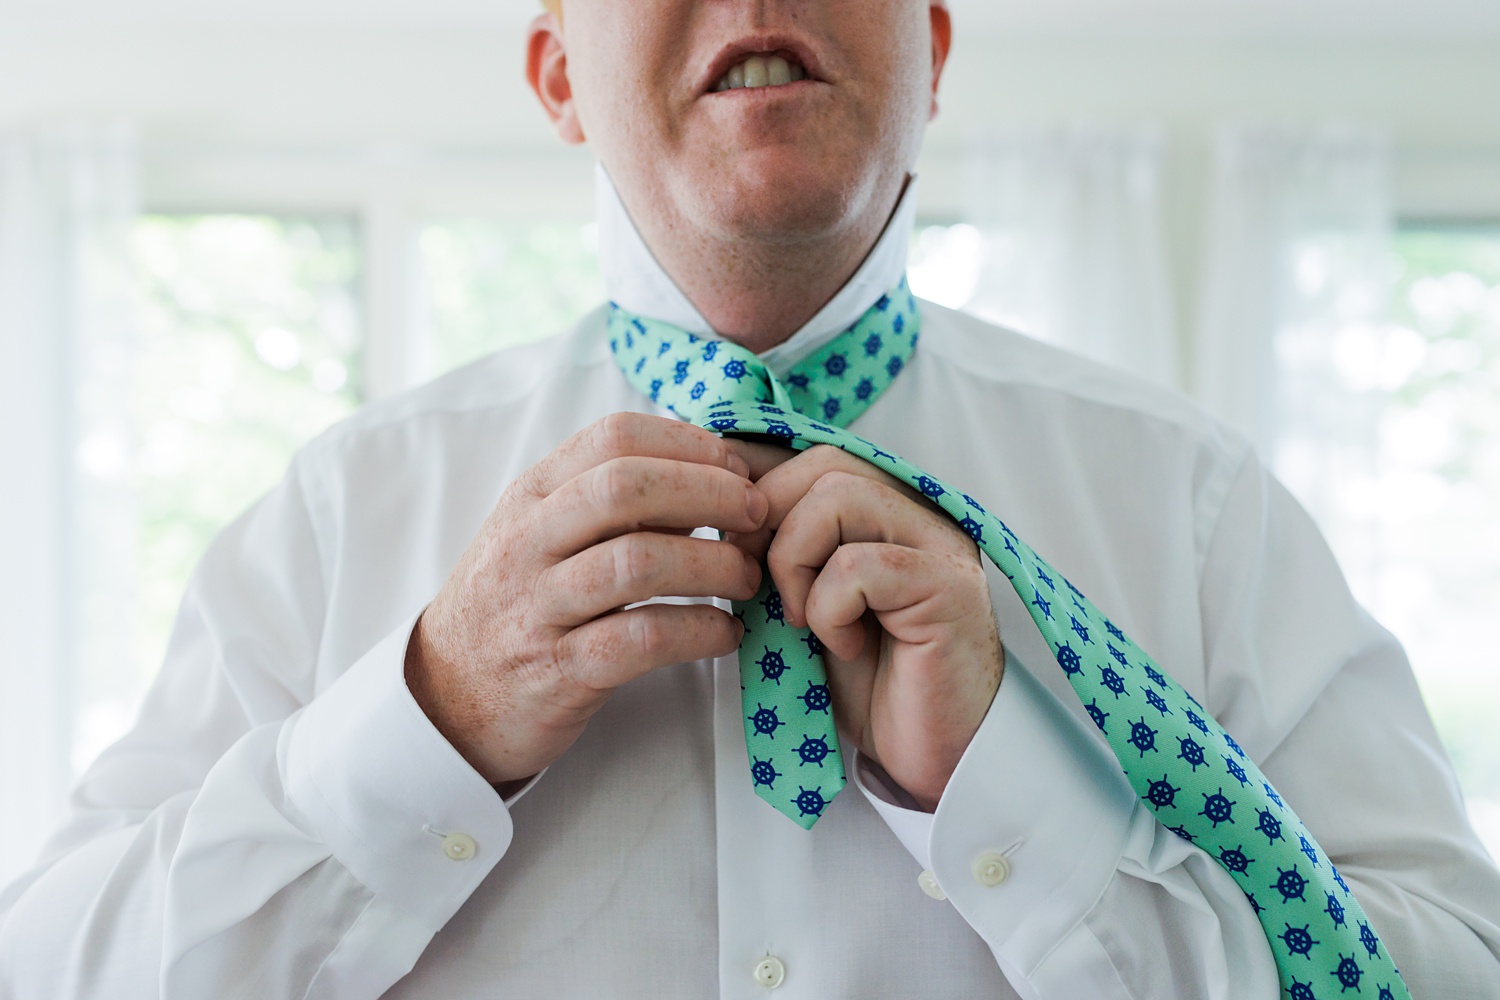 The groom gets his tie all figured out